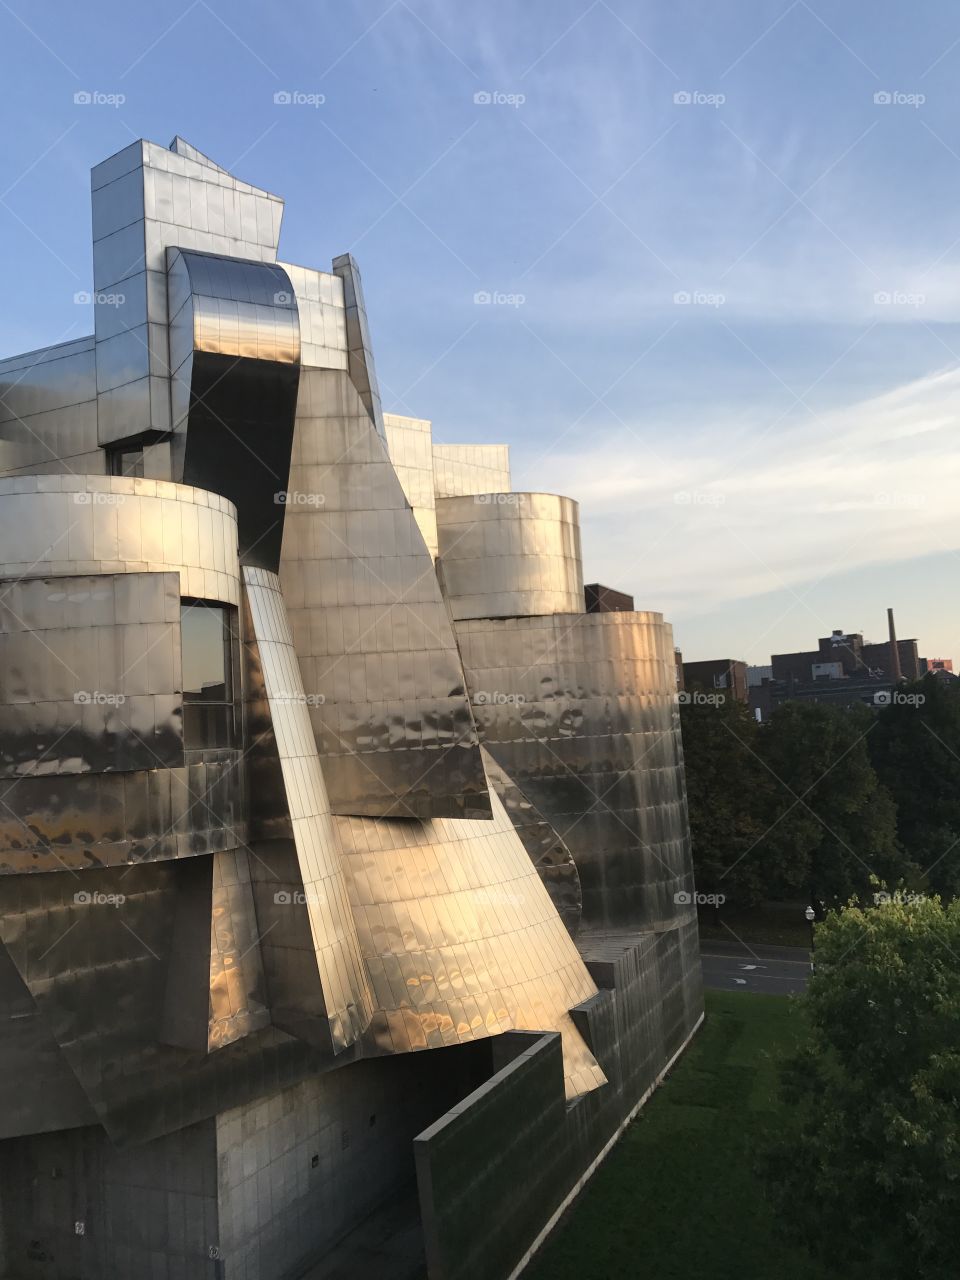 Weismann Art Museum in Minneapolis reflecting the last daylight on an early fall evening.